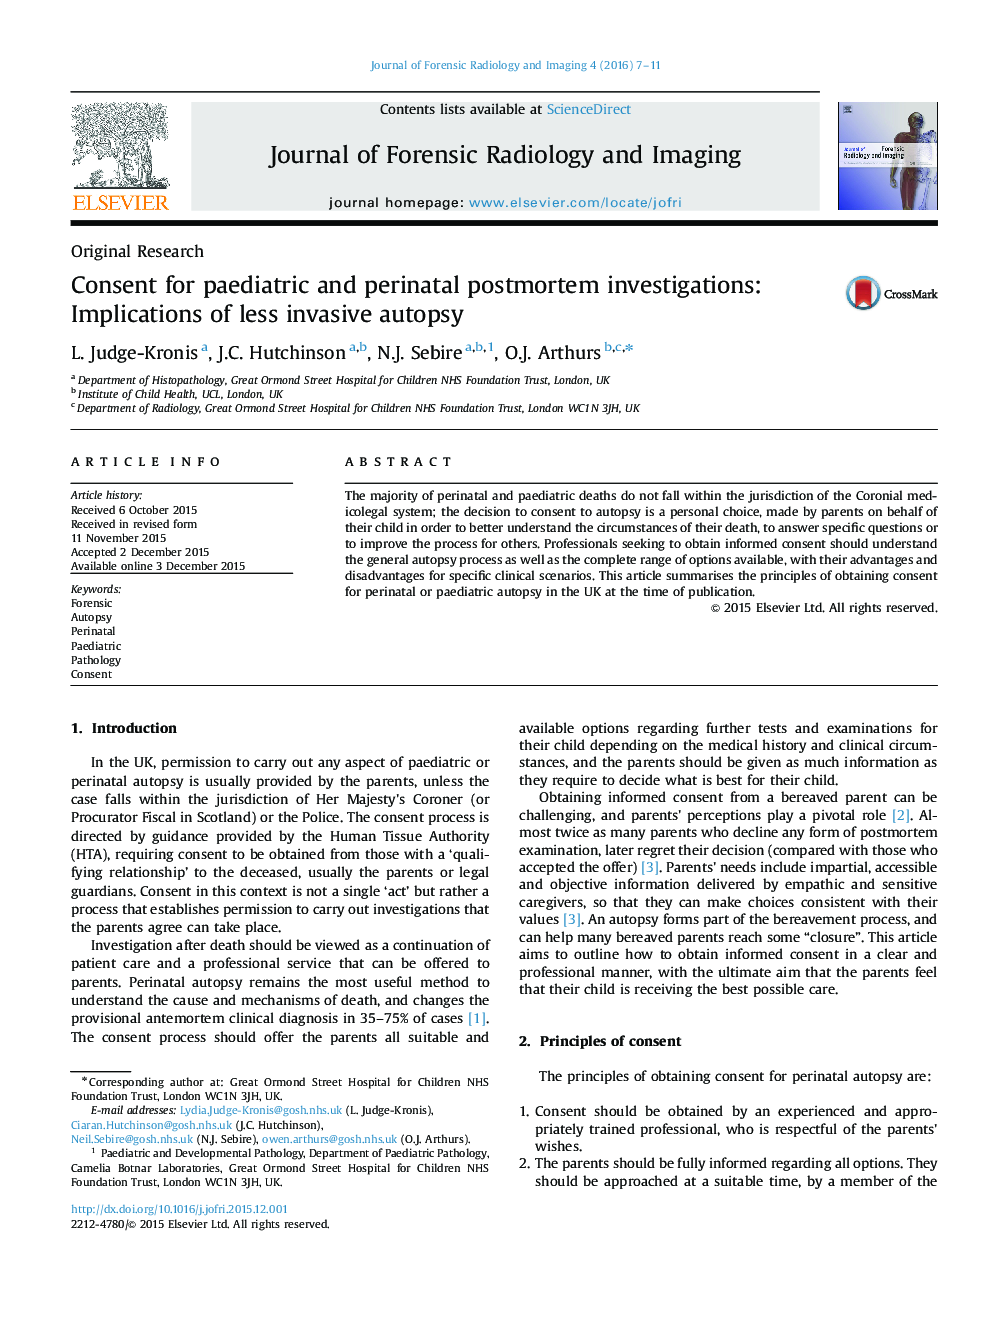 Consent for paediatric and perinatal postmortem investigations: Implications of less invasive autopsy